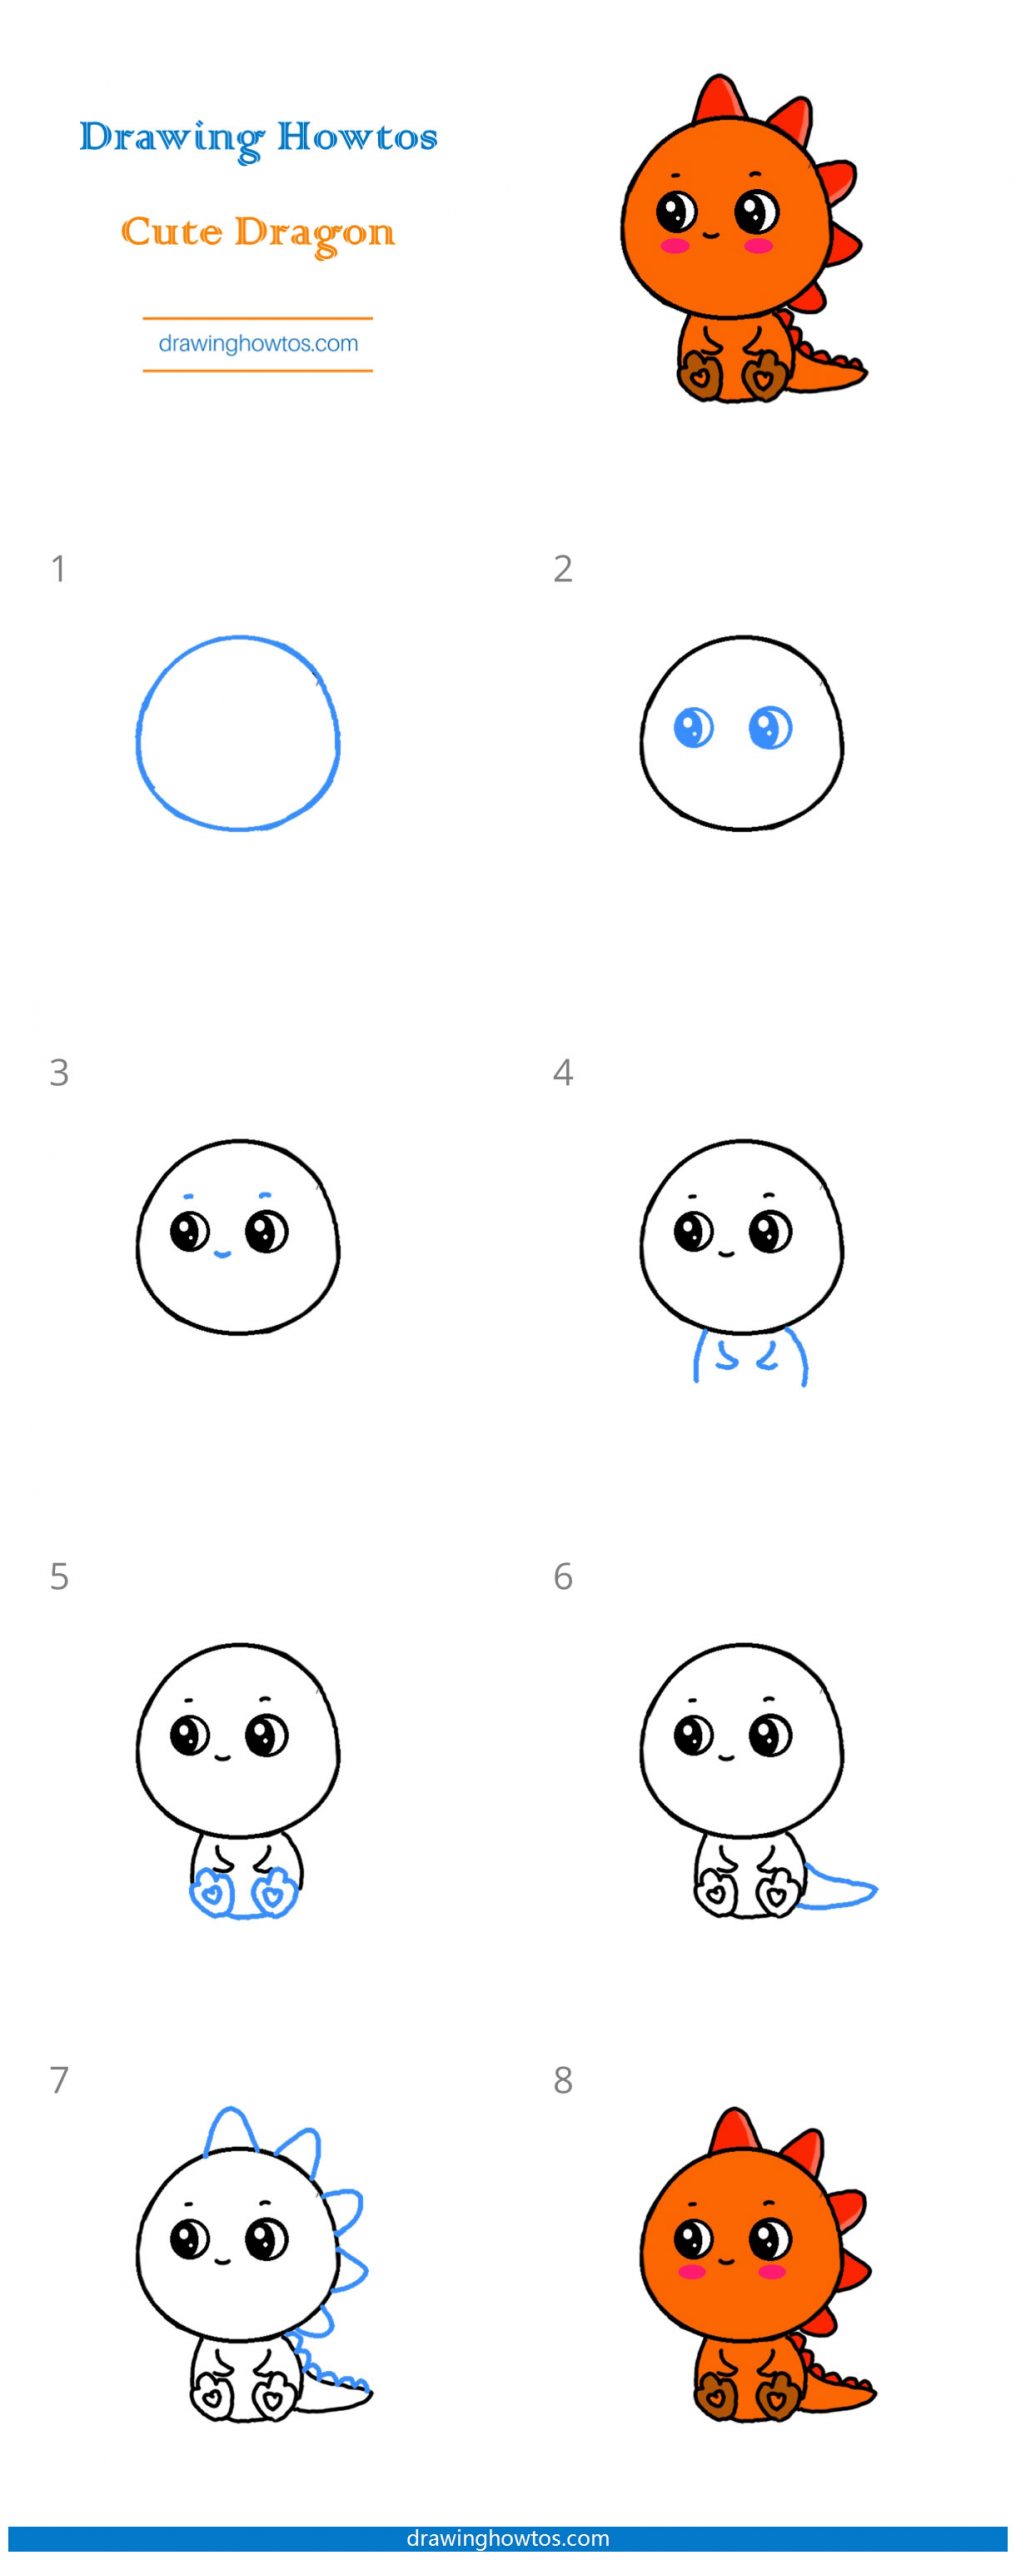 How to Draw a Cute Dragon Step by Step